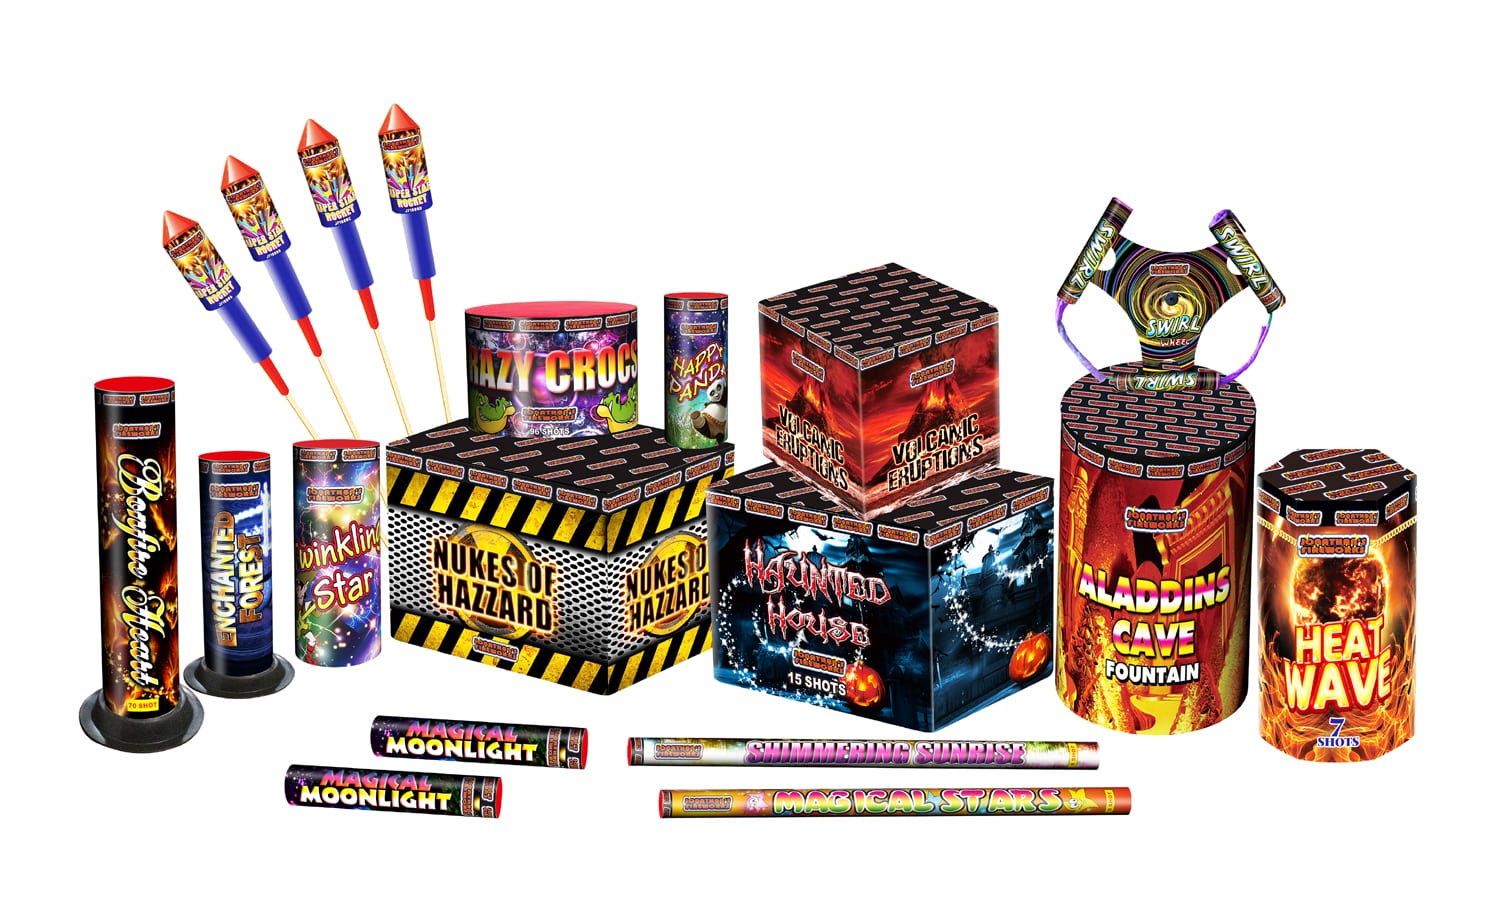 Contents: 19 Fireworks